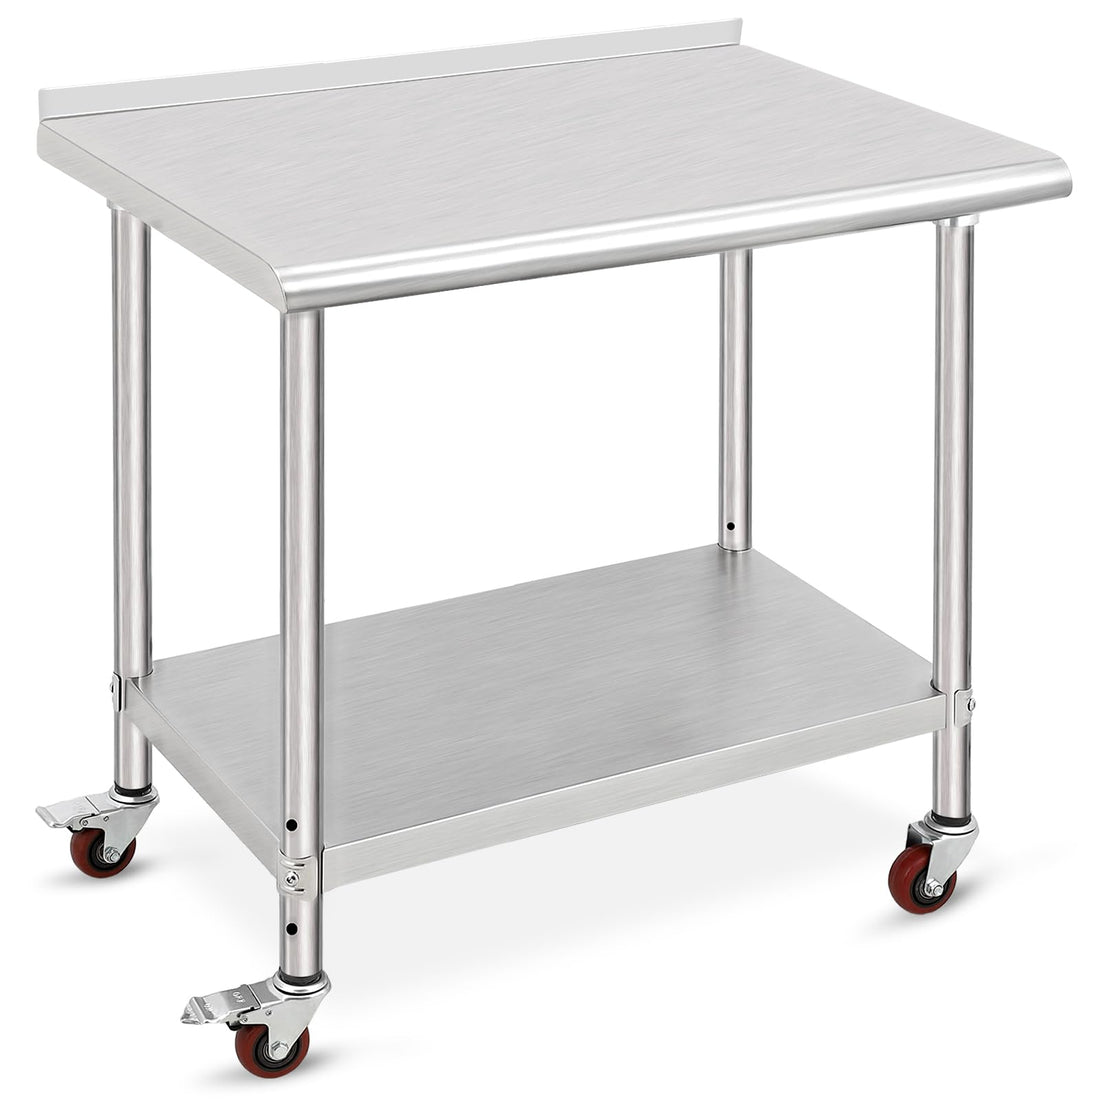 36x24x35 Inch Stainless Steel Table Metal Double Tier Worktable